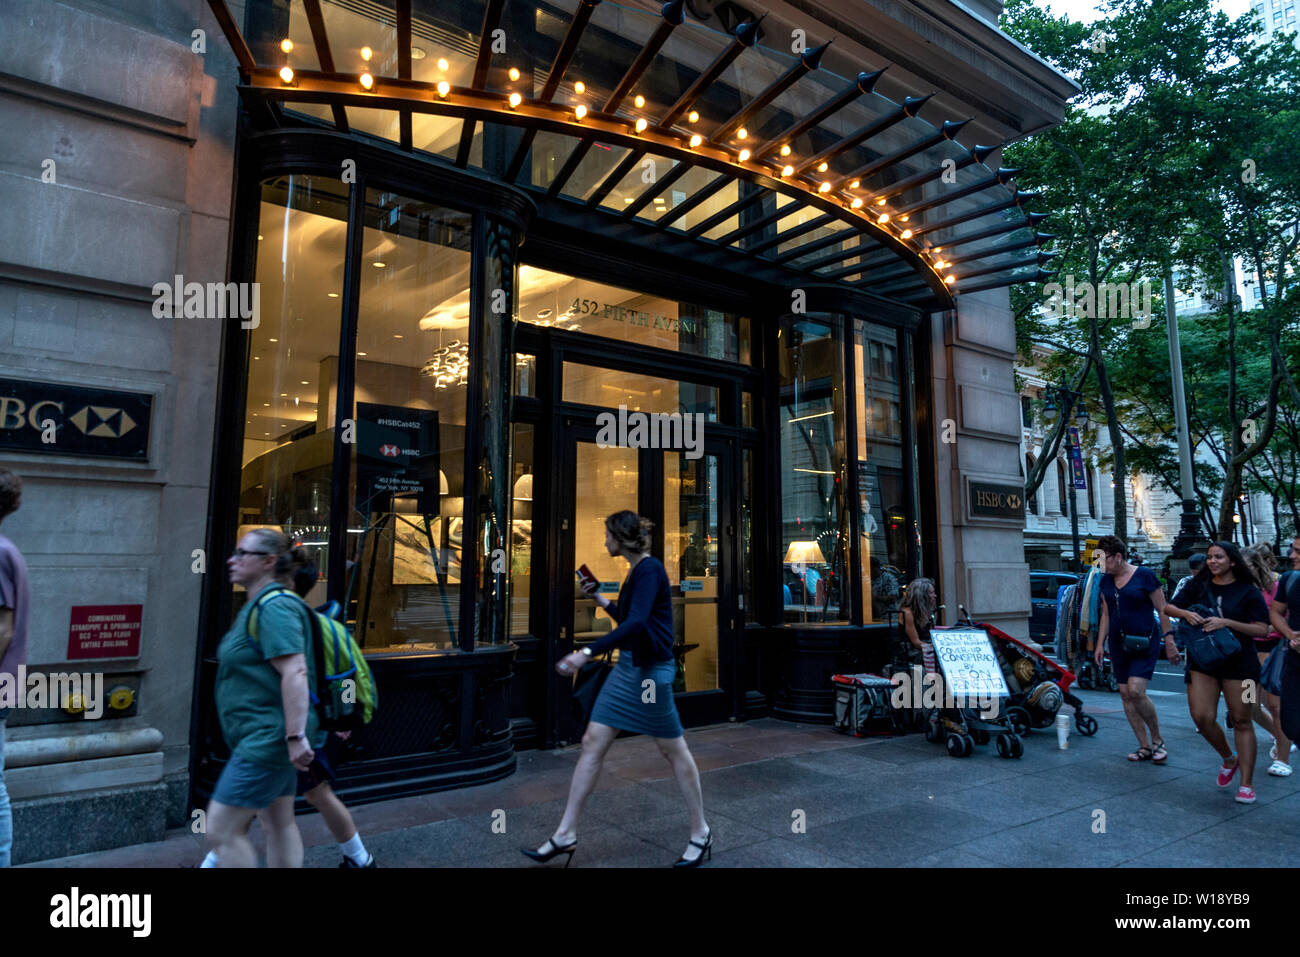 New York City, USA - August 1, 2018: Facade of a bank branch of HSBC Bank at night with a beggar and people around in 5th Avenue (Fifth Avenue), Manha Stock Photo